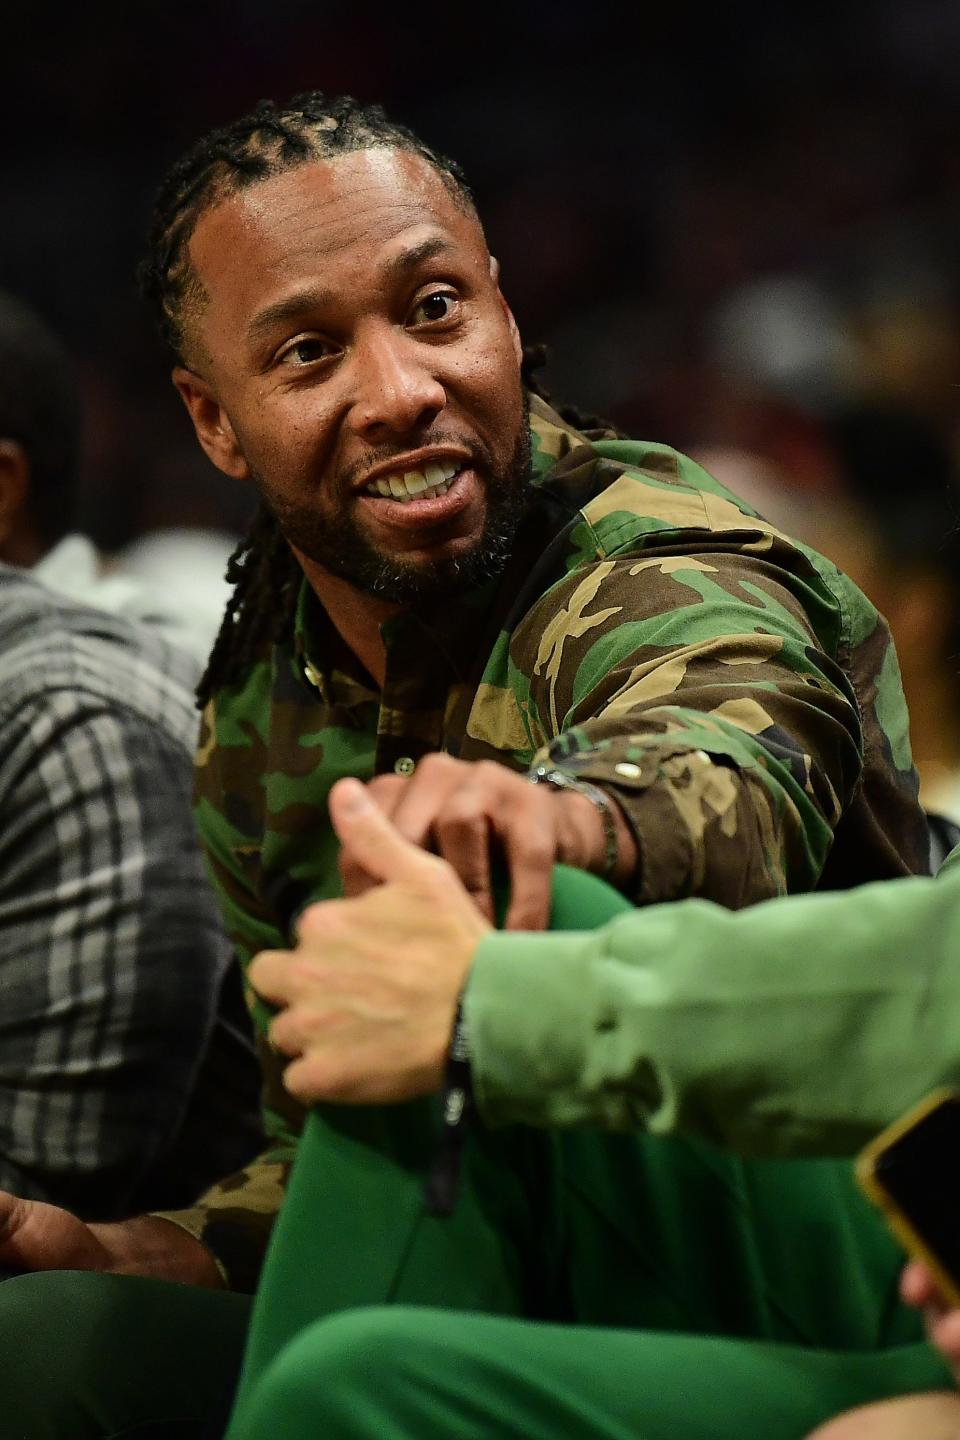 Apr 6, 2022; Los Angeles, California, USA; Phoenix Suns minority owner and former NFL player Larry Fitzgerald attends the game against the Los Angeles Clippers at Crypto.com Arena.